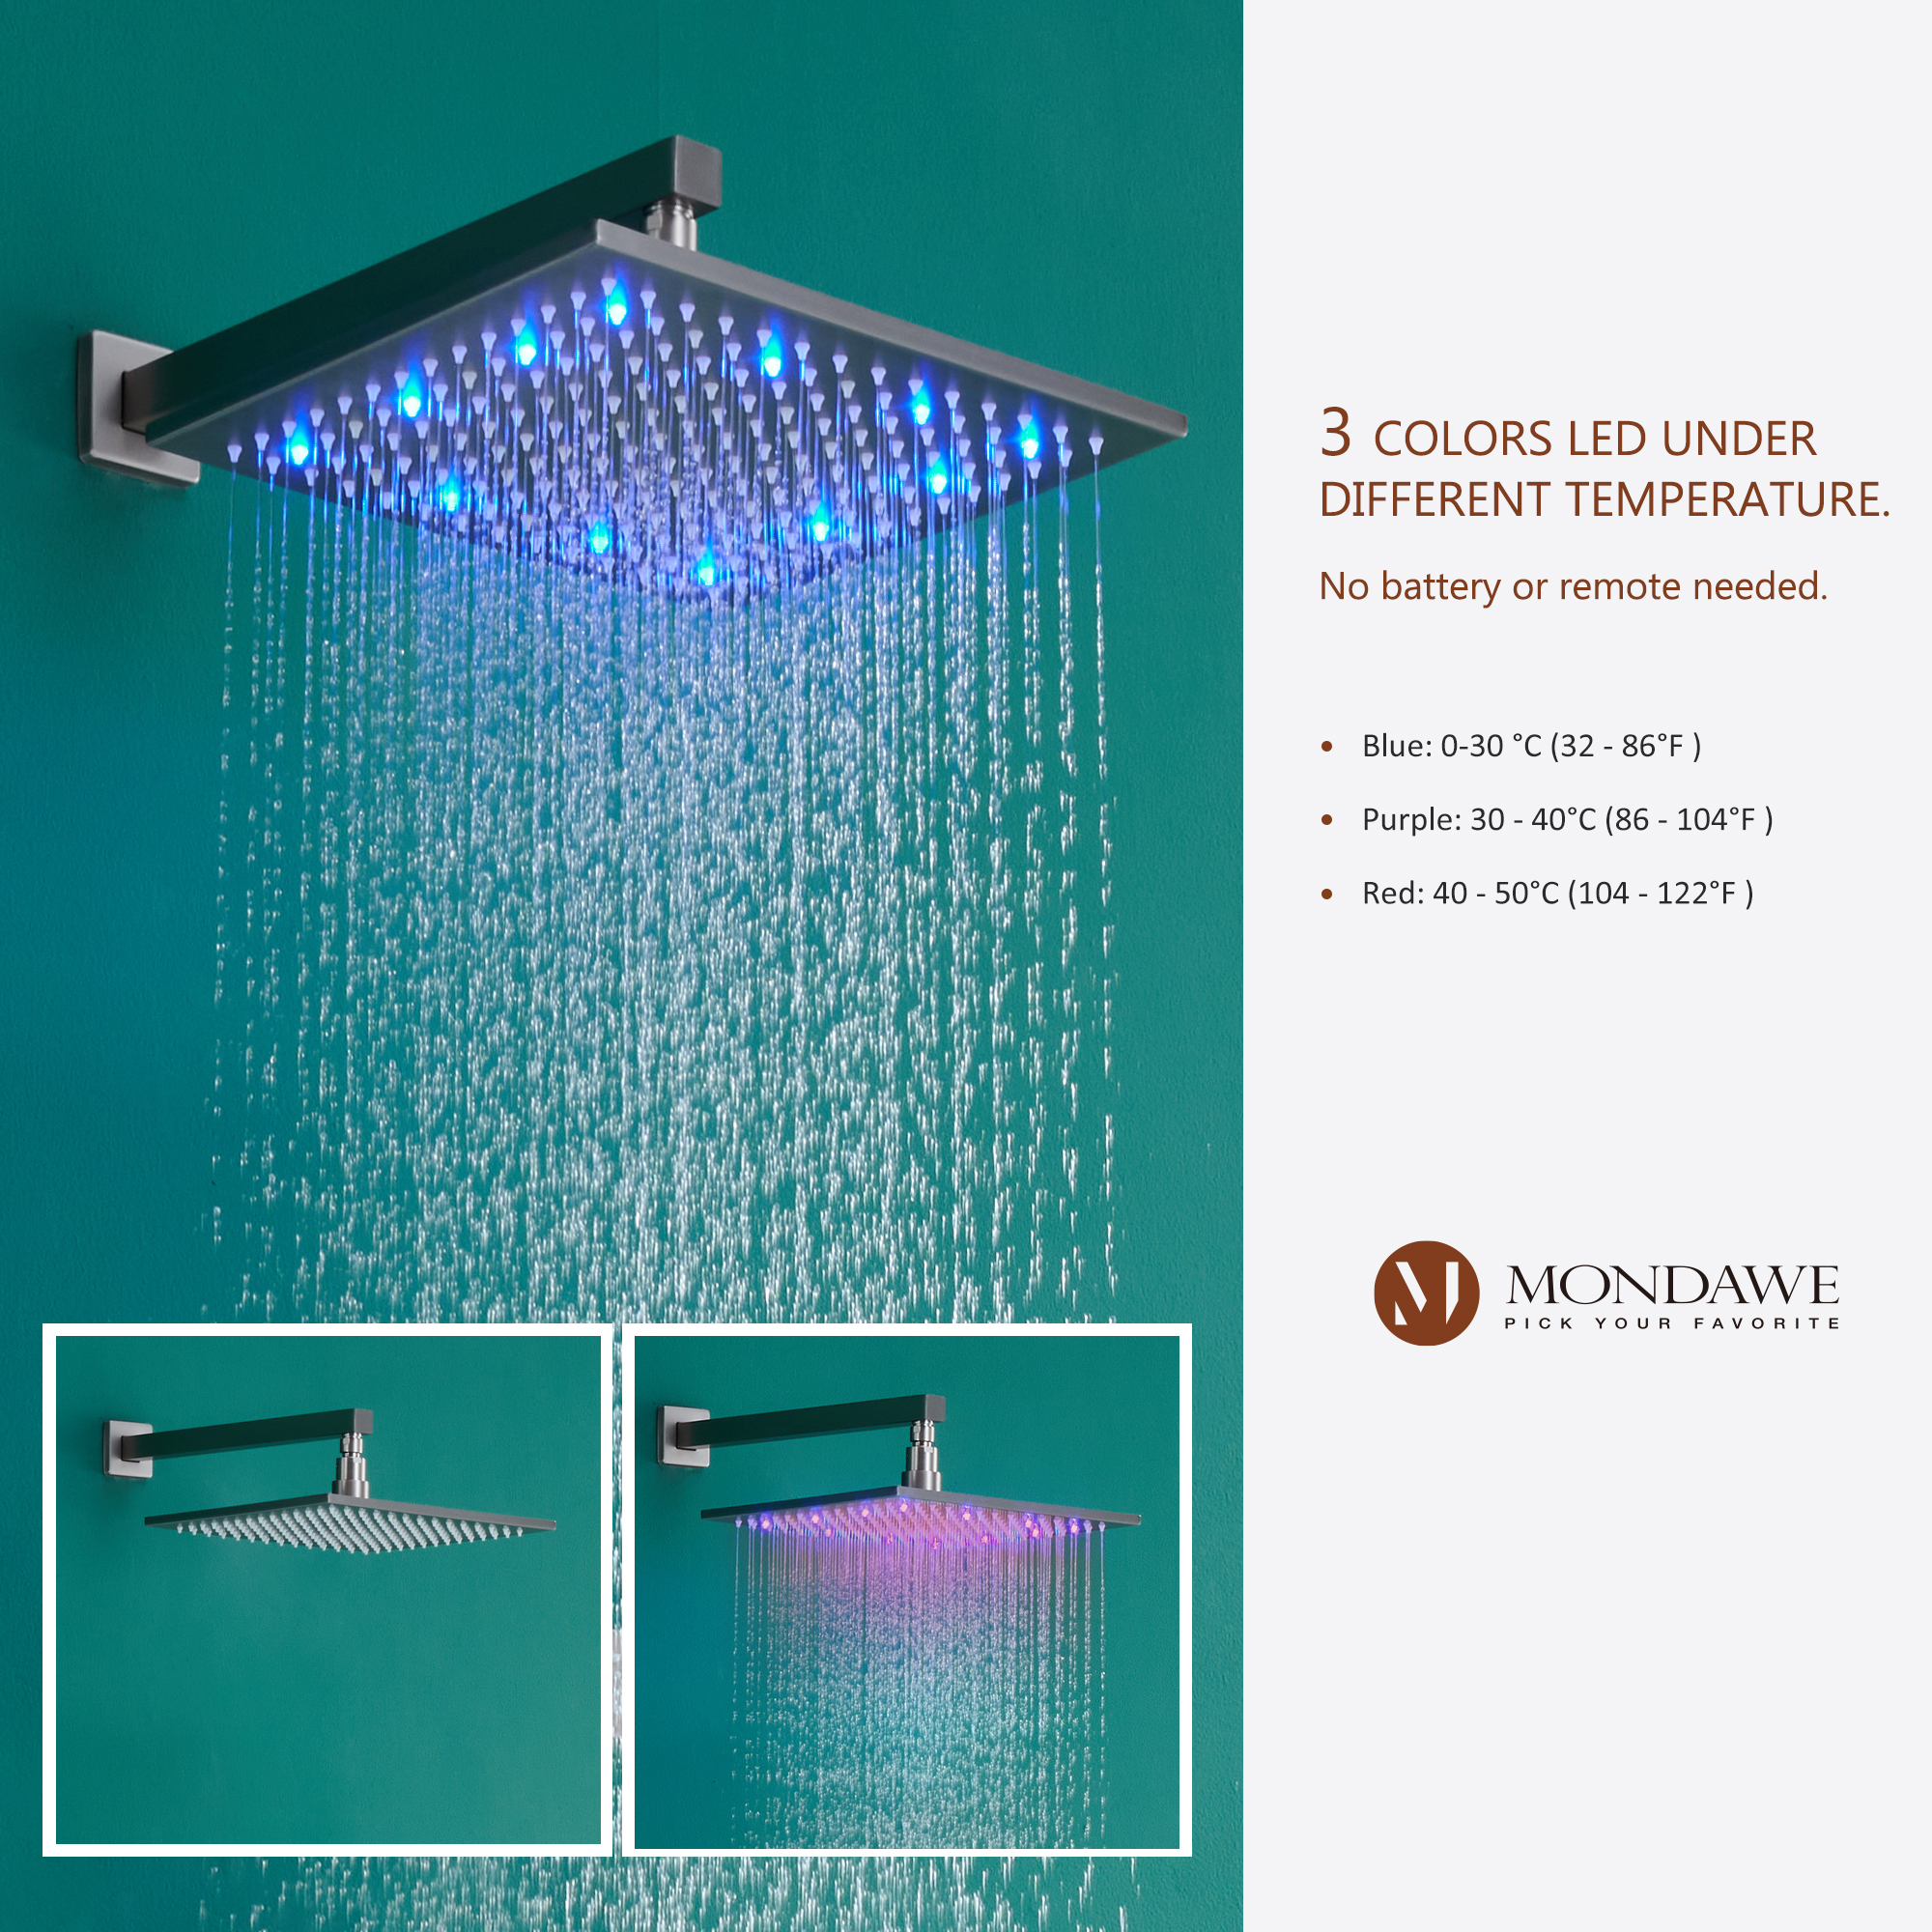 Mondawe Luxury Wall Mount Rain Shower Head with 6 Shower Jet and LED 3-Spray Patterns Thermostatic 12 in. -Mondawe